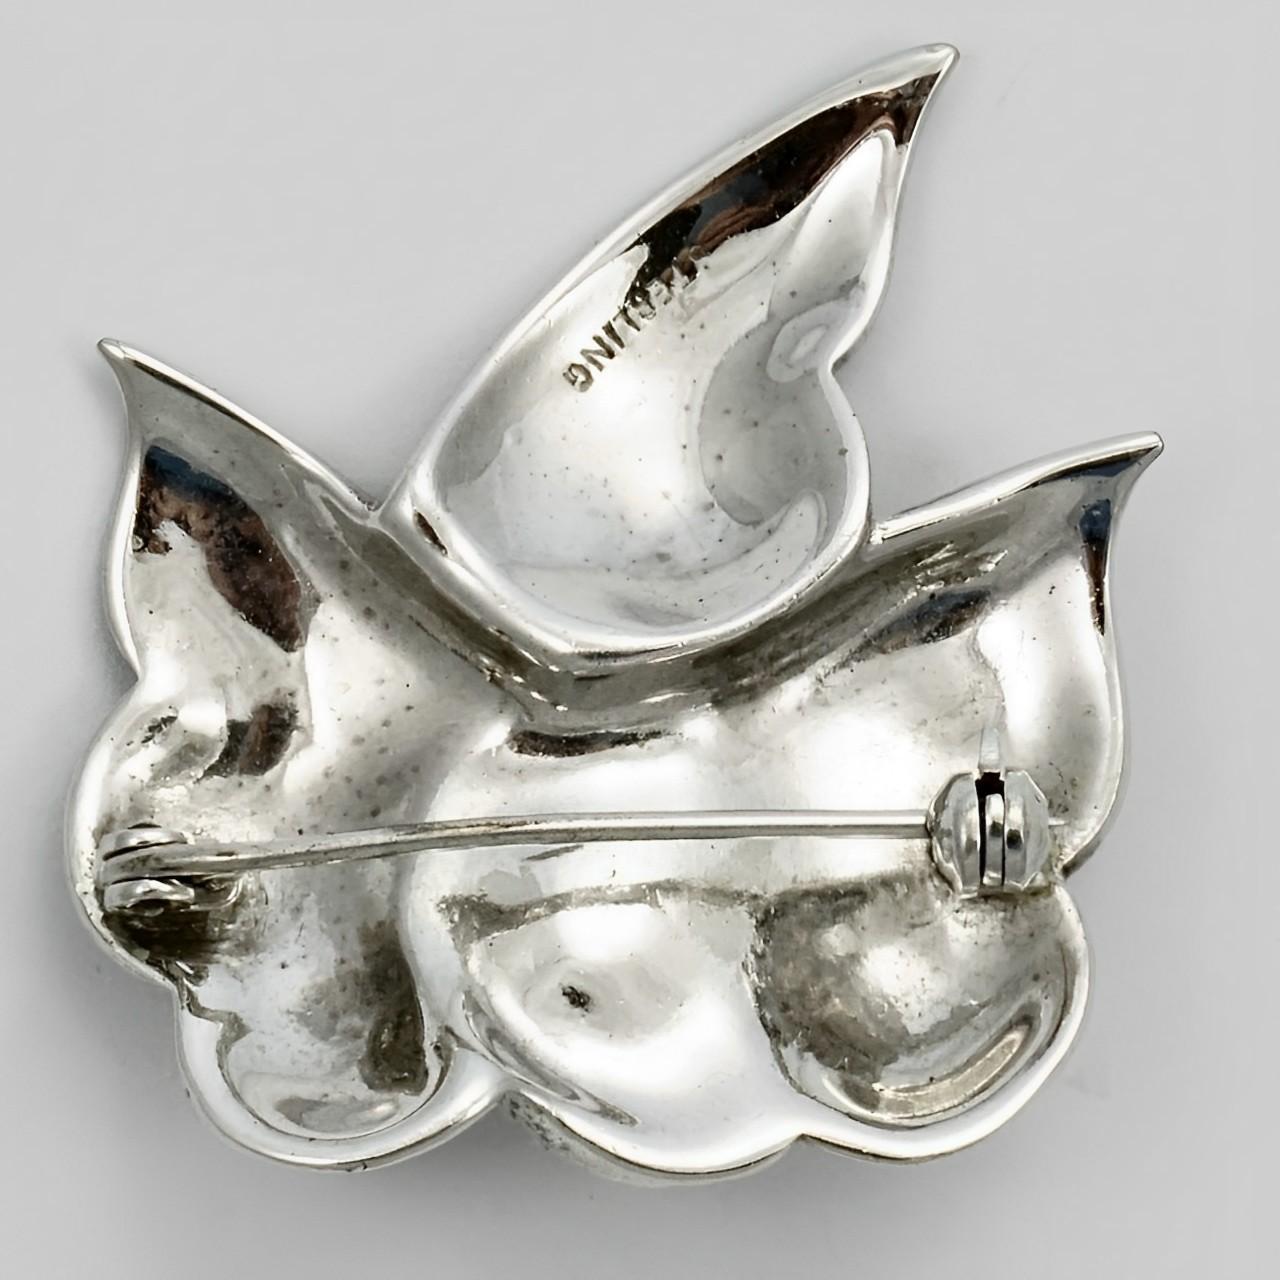 Beautiful Art Deco sterling silver textured leaf brooch studded with marcasites. The back is smooth. Measuring length 3.7 cm / 1.45 inches by width 3.5 cm / 1.37 inches. There is wear as expected. There are five replacement marcasites.

This is a